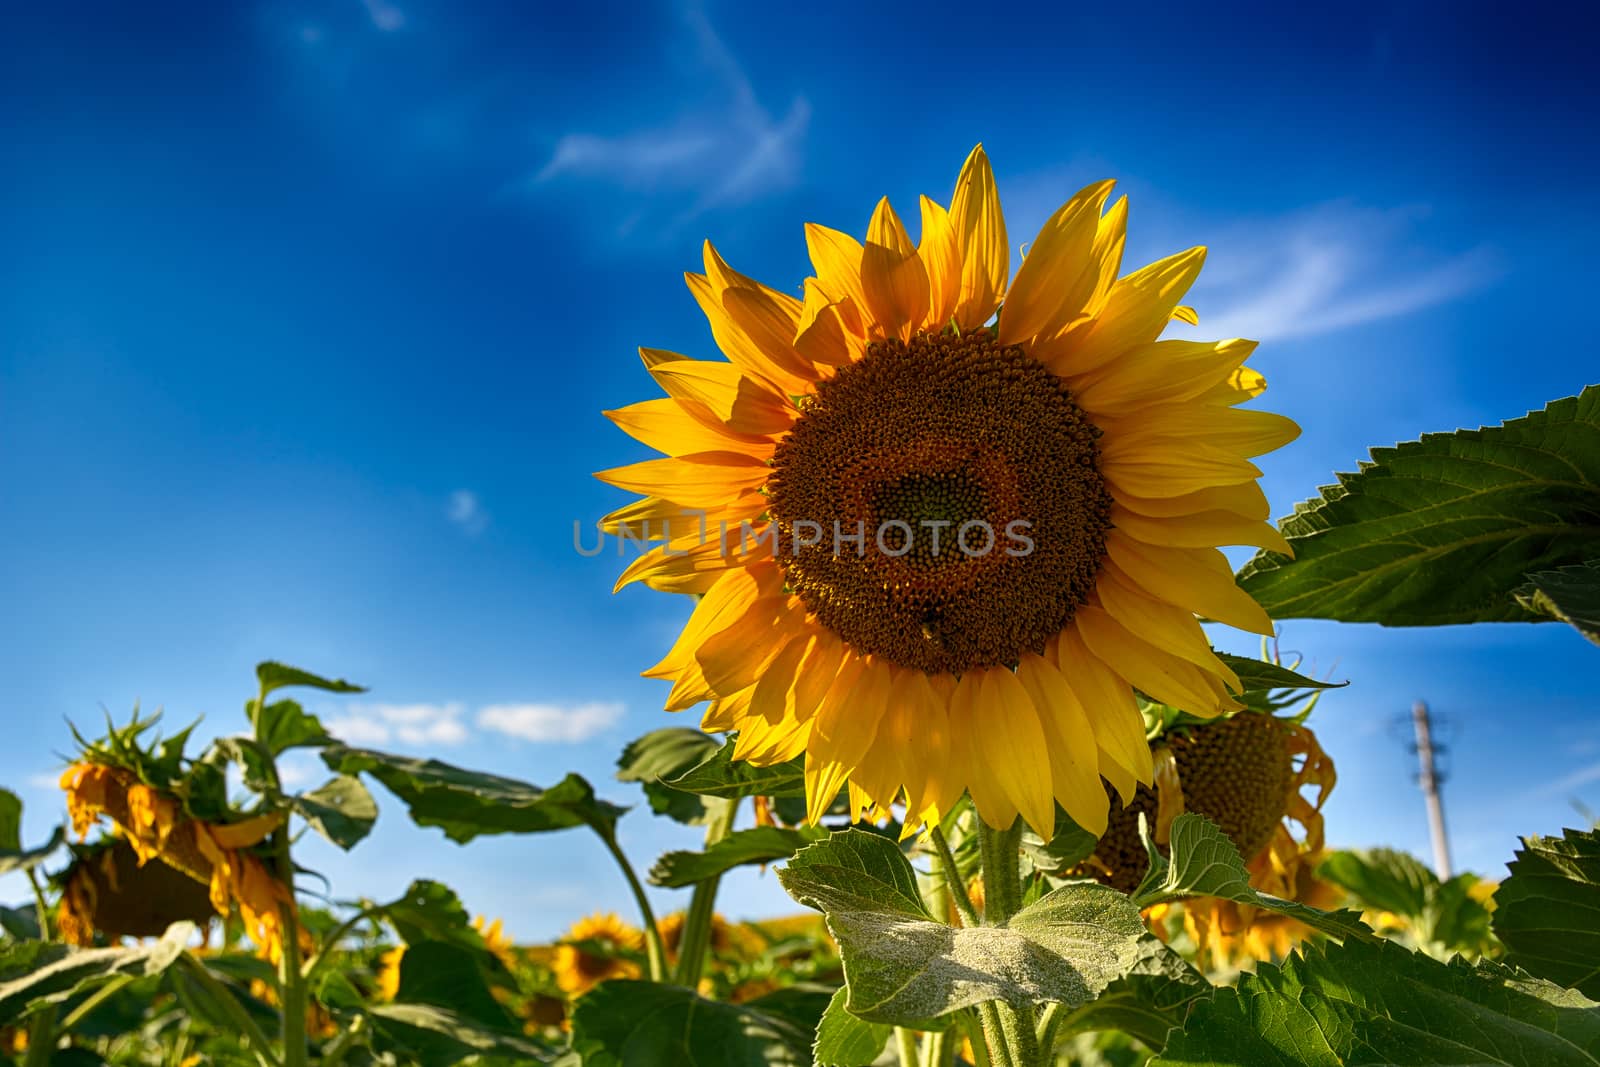 blooming sunflowers on a background sunset